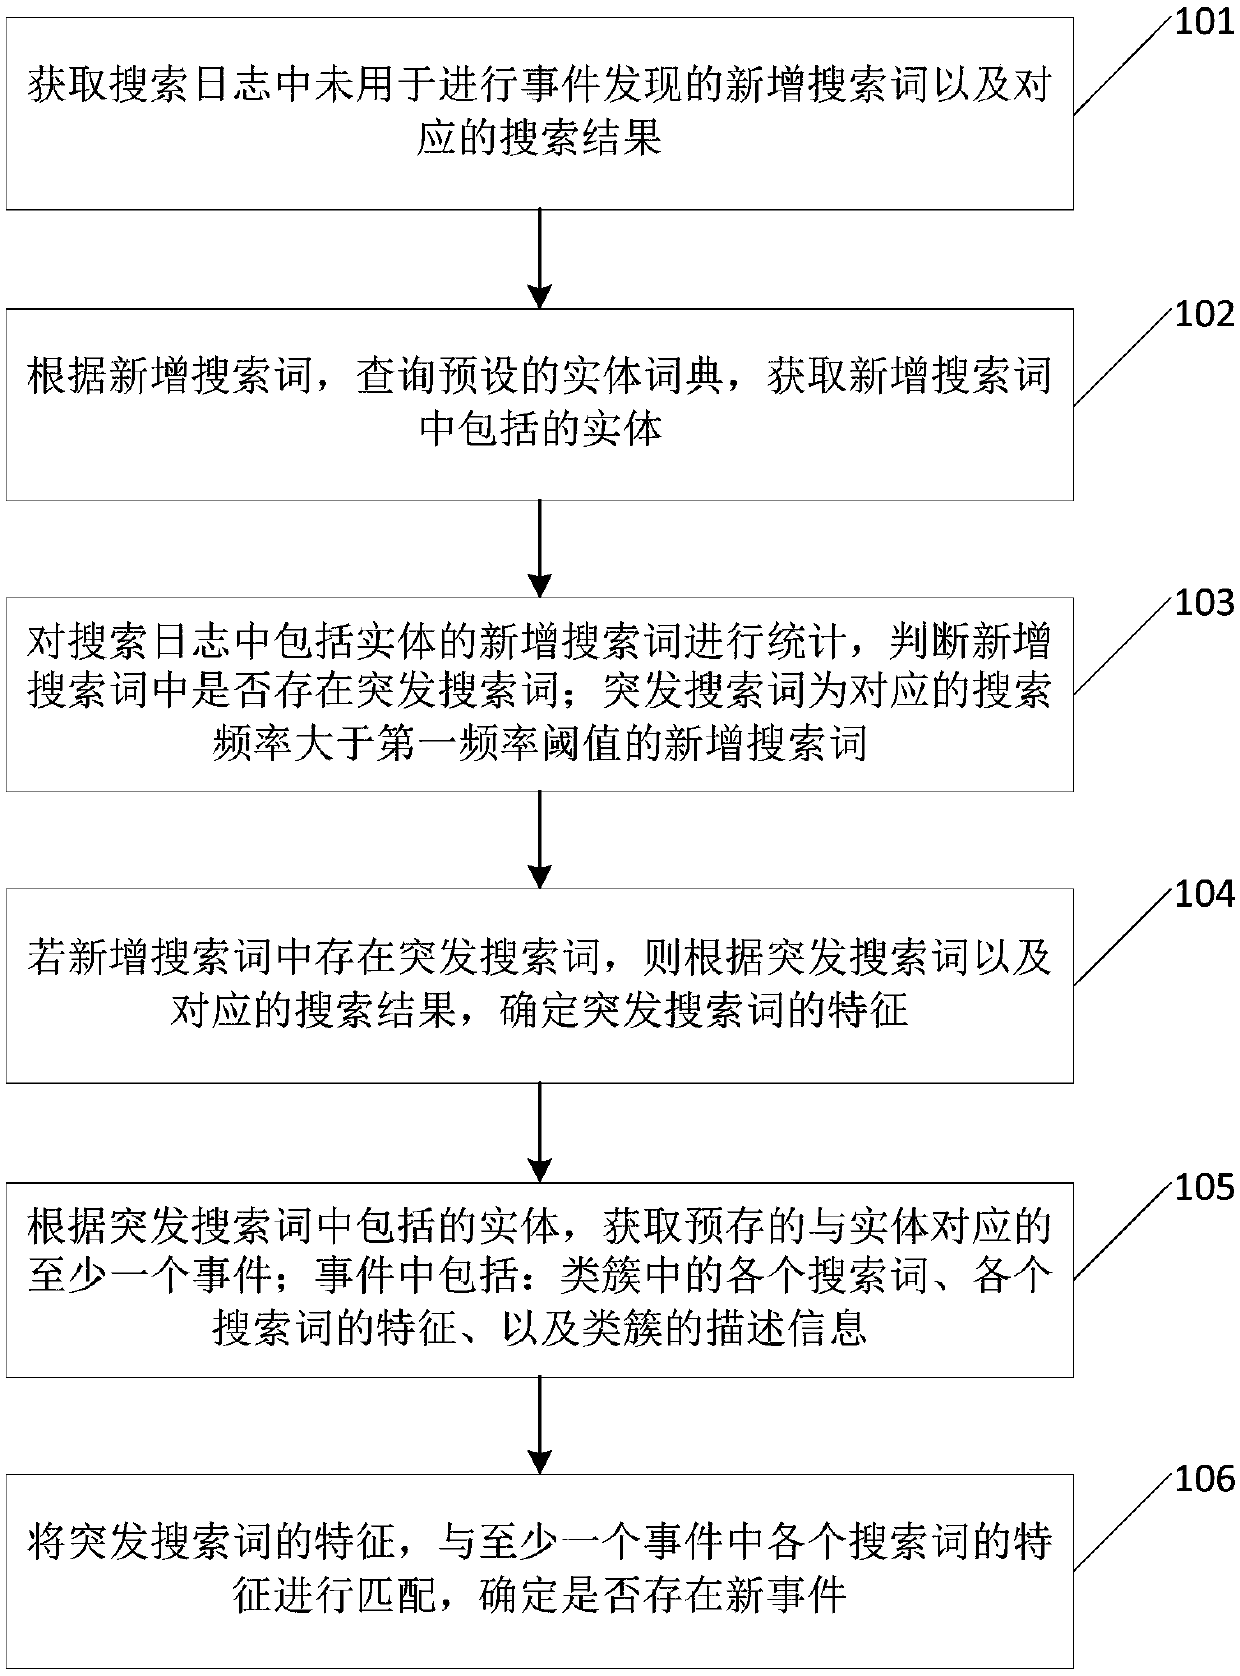 Search log-based event discovery method and apparatus